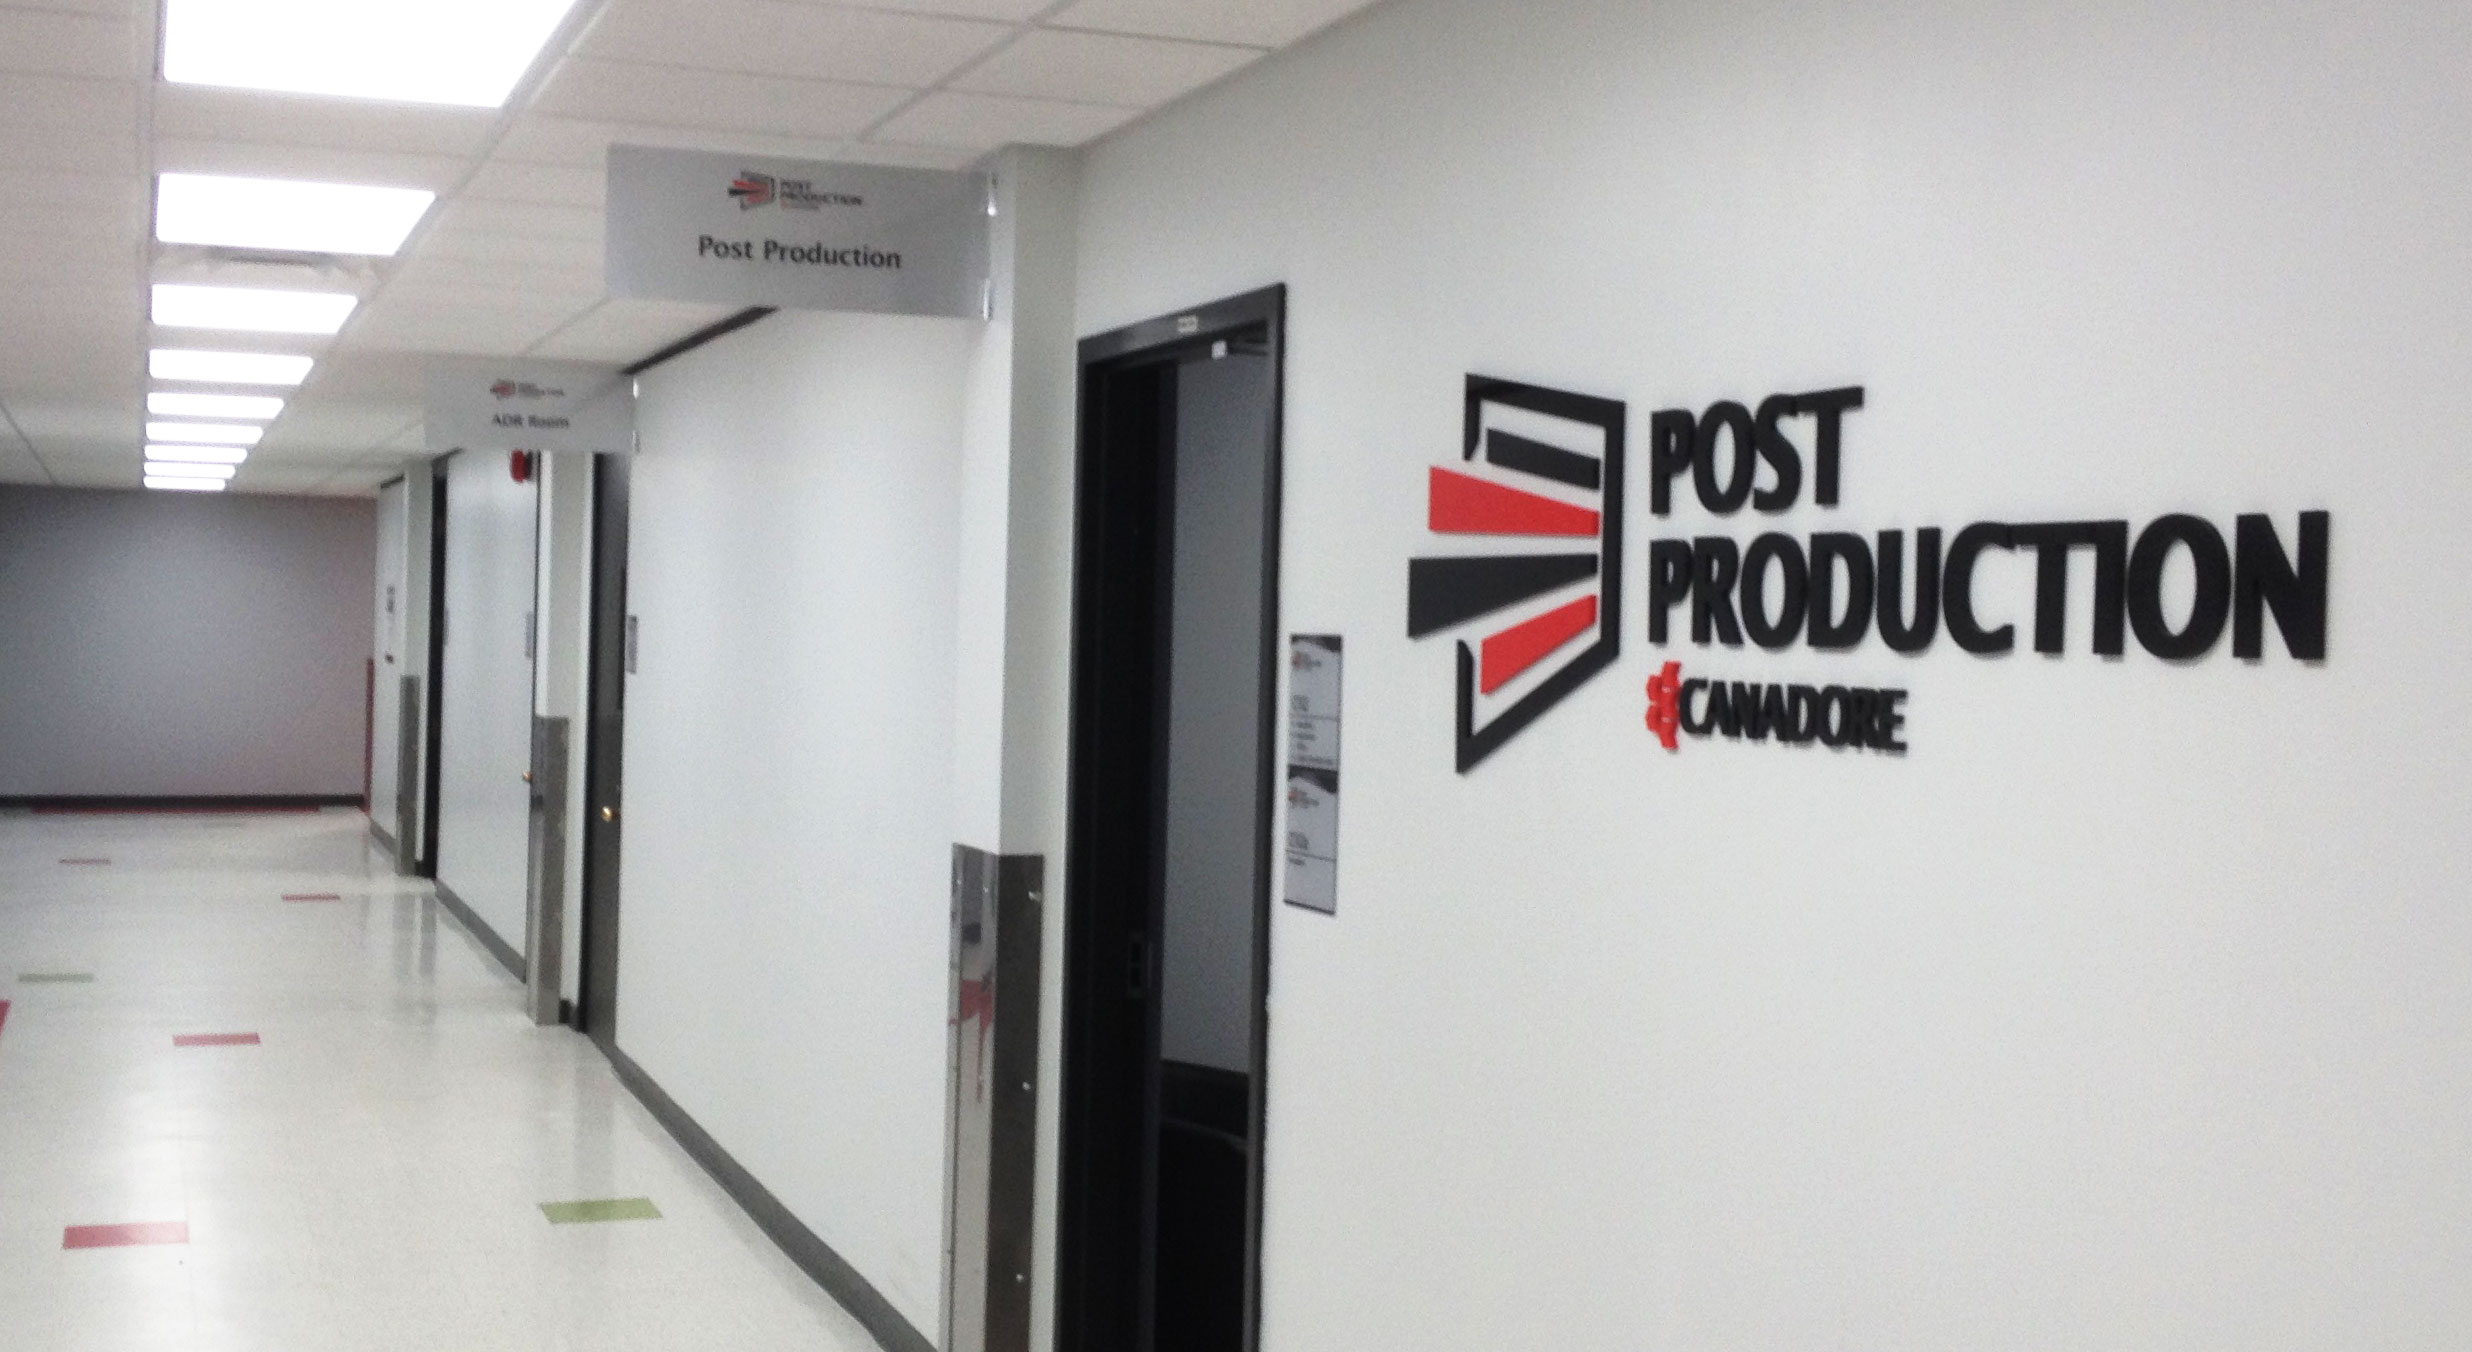 Canadore College Post Production - 3D Wall lettering